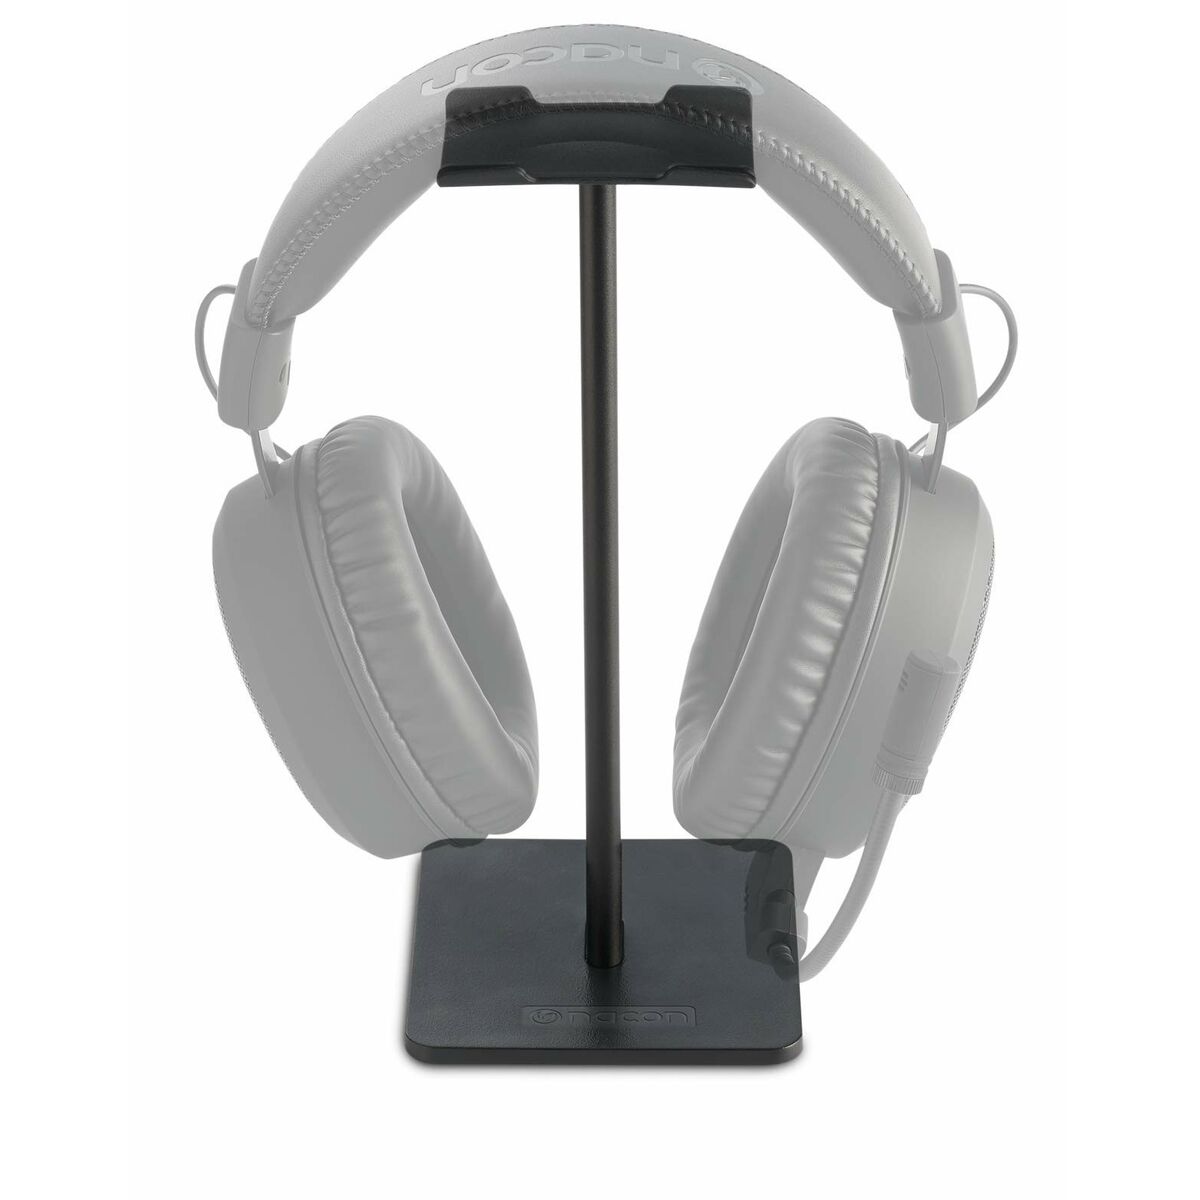 Headphone stand Nacon MULTIHEADSETSTAND, Nacon, Electronics, Mobile communication and accessories, headphone-stand-nacon-multiheadsetstand, Brand_Nacon, category-reference-2609, category-reference-2642, category-reference-2847, category-reference-t-19653, category-reference-t-21312, category-reference-t-25535, category-reference-t-4036, category-reference-t-4037, computers / peripherals, Condition_NEW, entertainment, music, office, Price_20 - 50, telephones & tablets, Teleworking, RiotNook